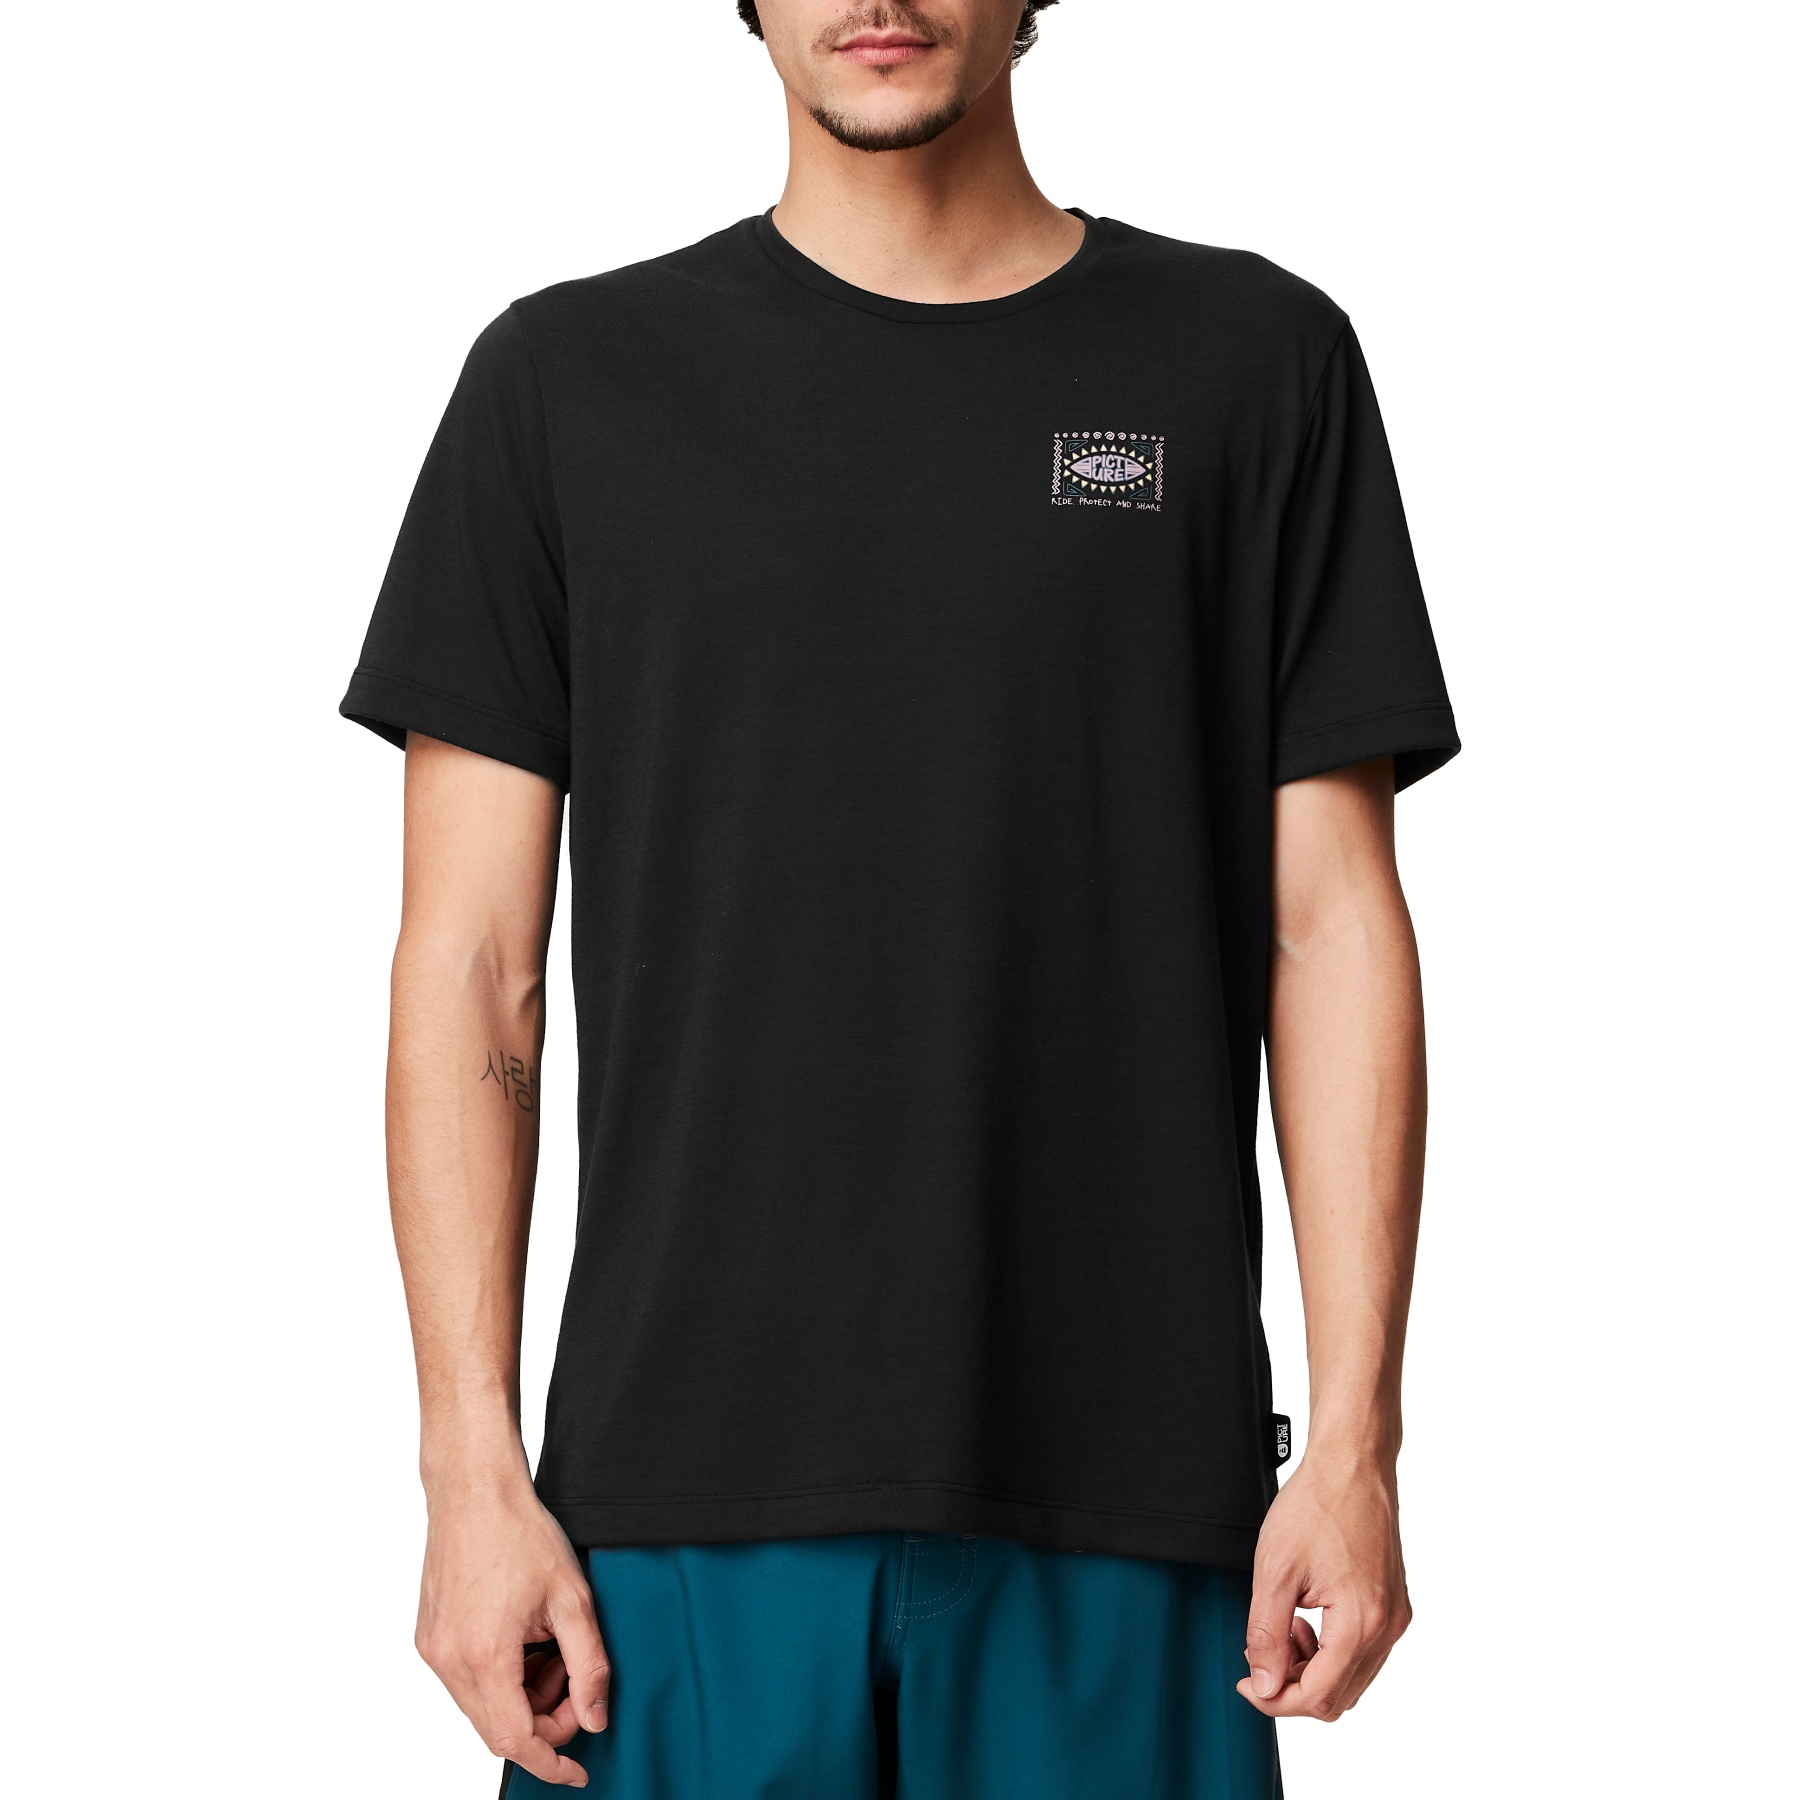 Picture of Picture Maribo Short Sleeve Surf Tee Men - Black Hand